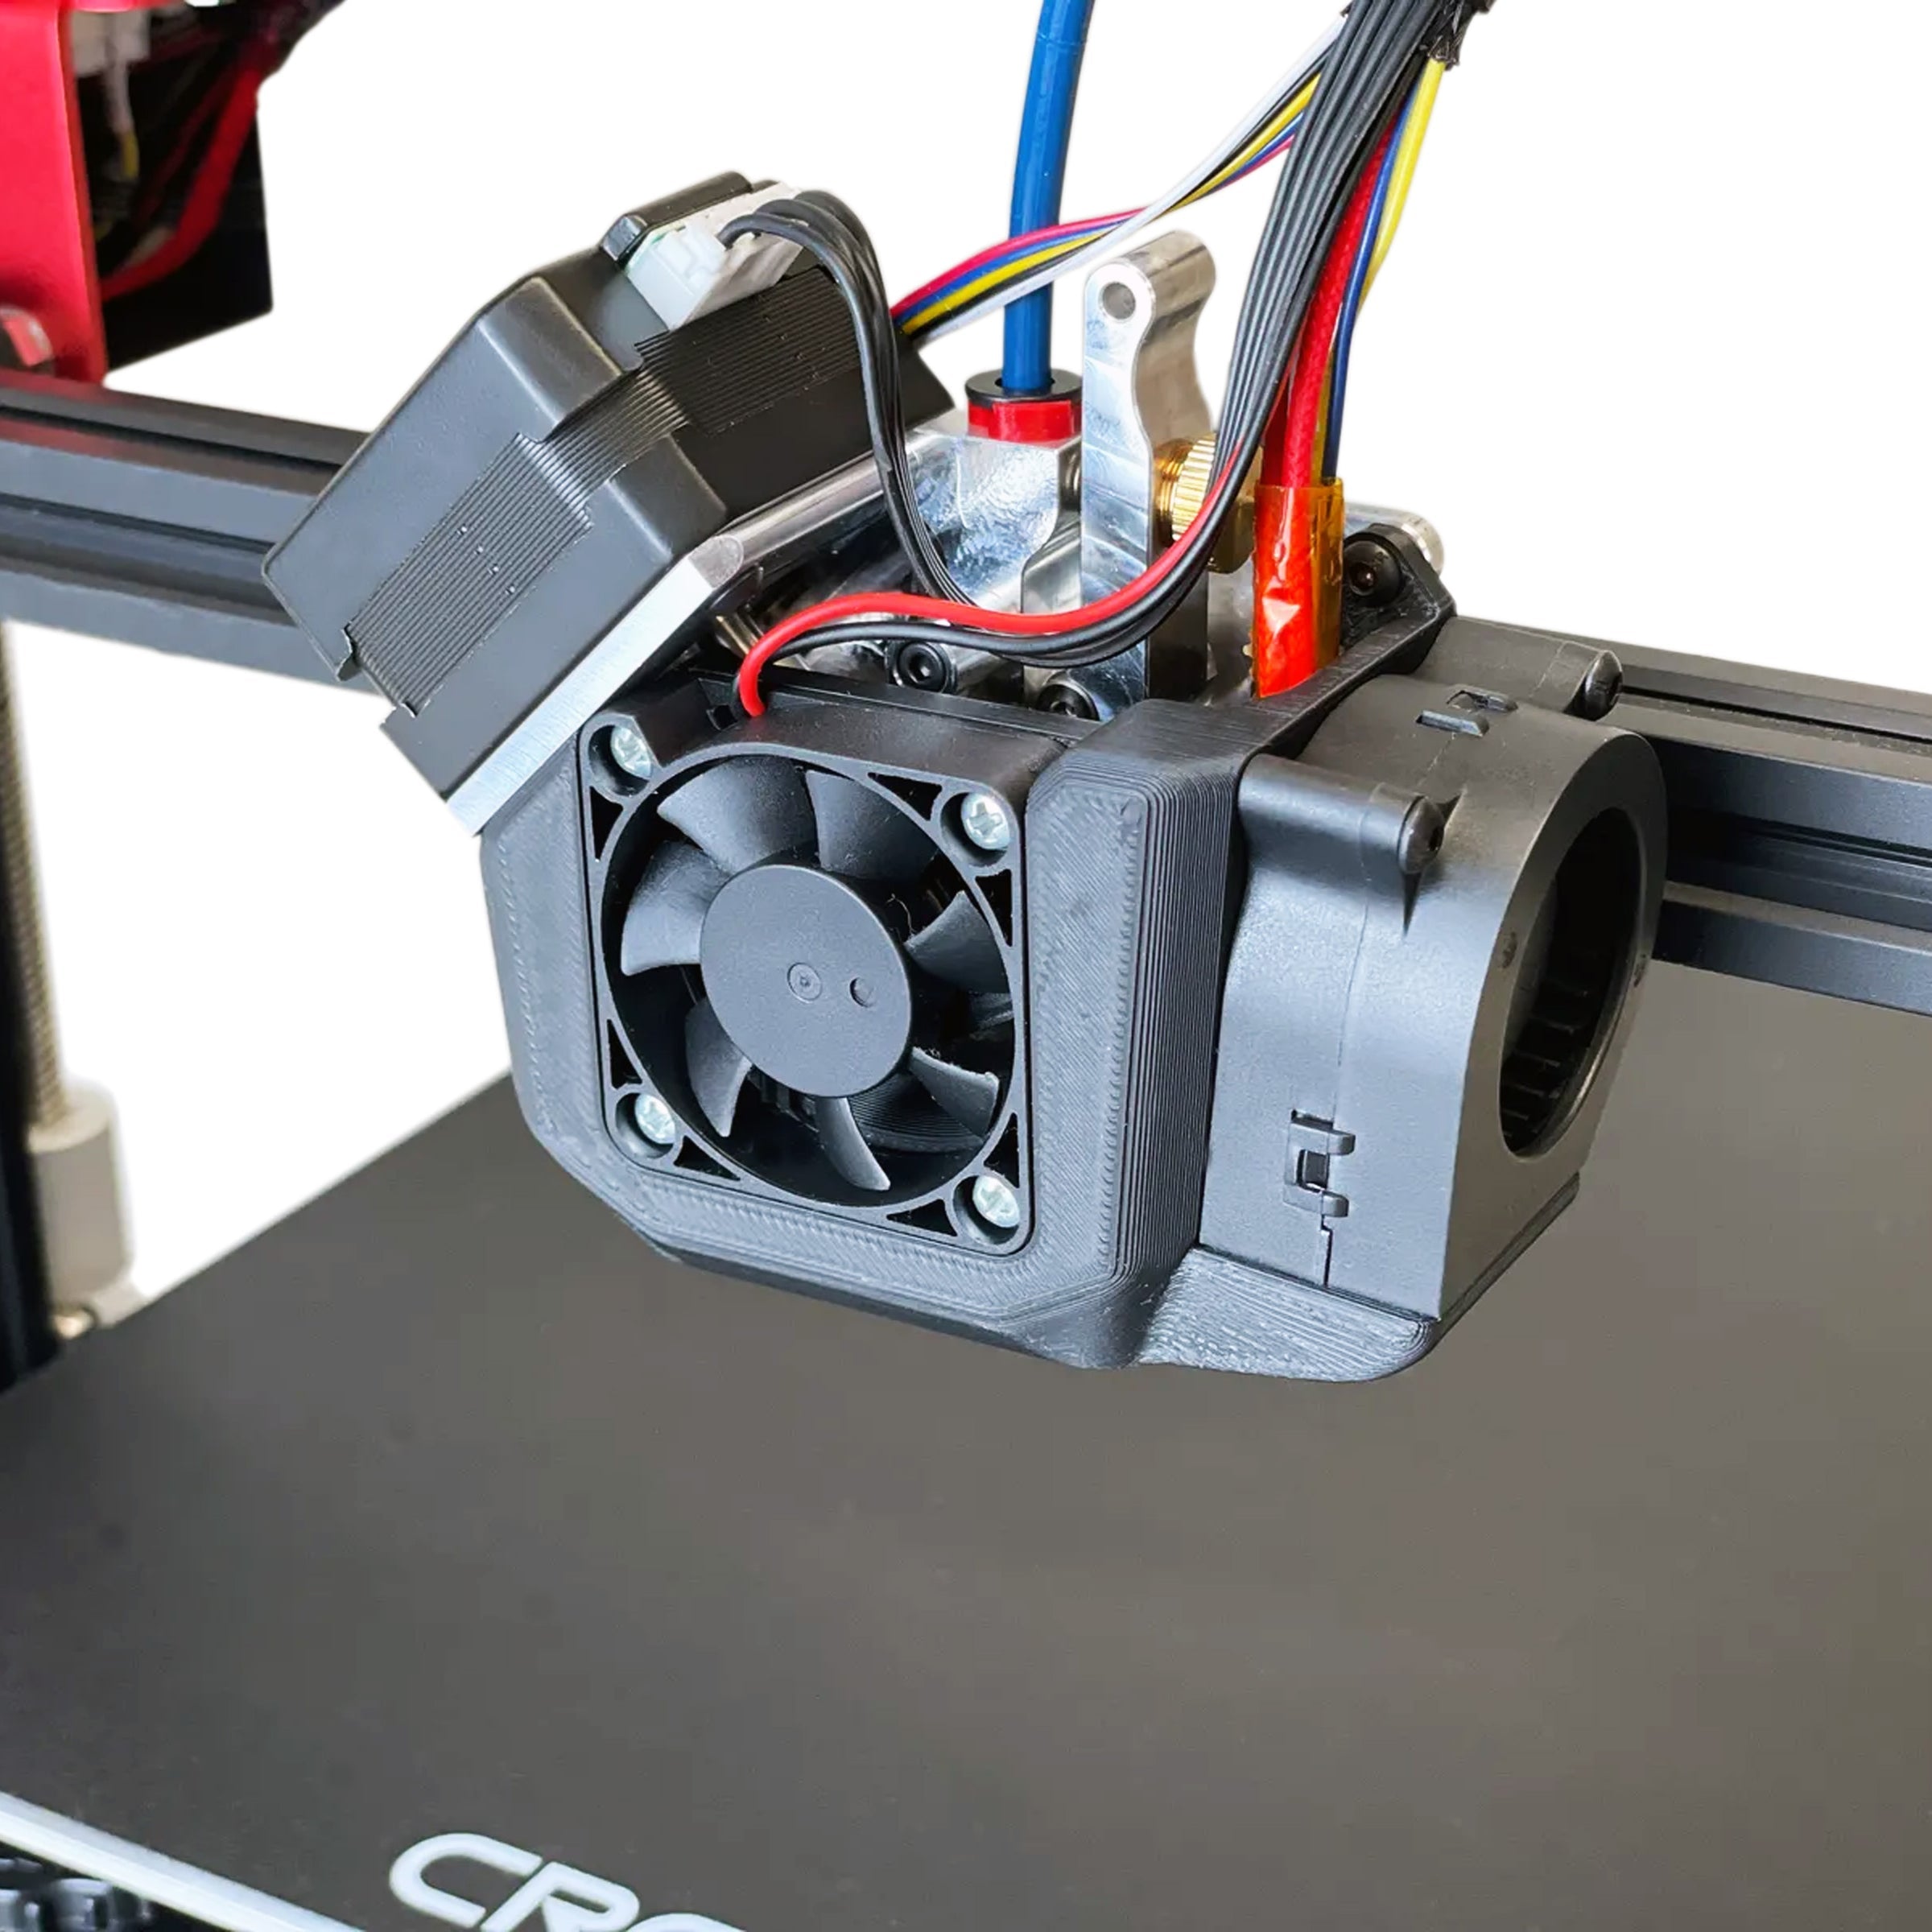 Close-up of the Micro Swiss NG Direct Drive Extruder for Creality CR-10S Pro V2 and CR-10 Max, featuring a small cooling fan, dual gear drive, and various colorful wires. The bed of the 3D printer is partially visible at the bottom with the letters "CRE" from the brand name.